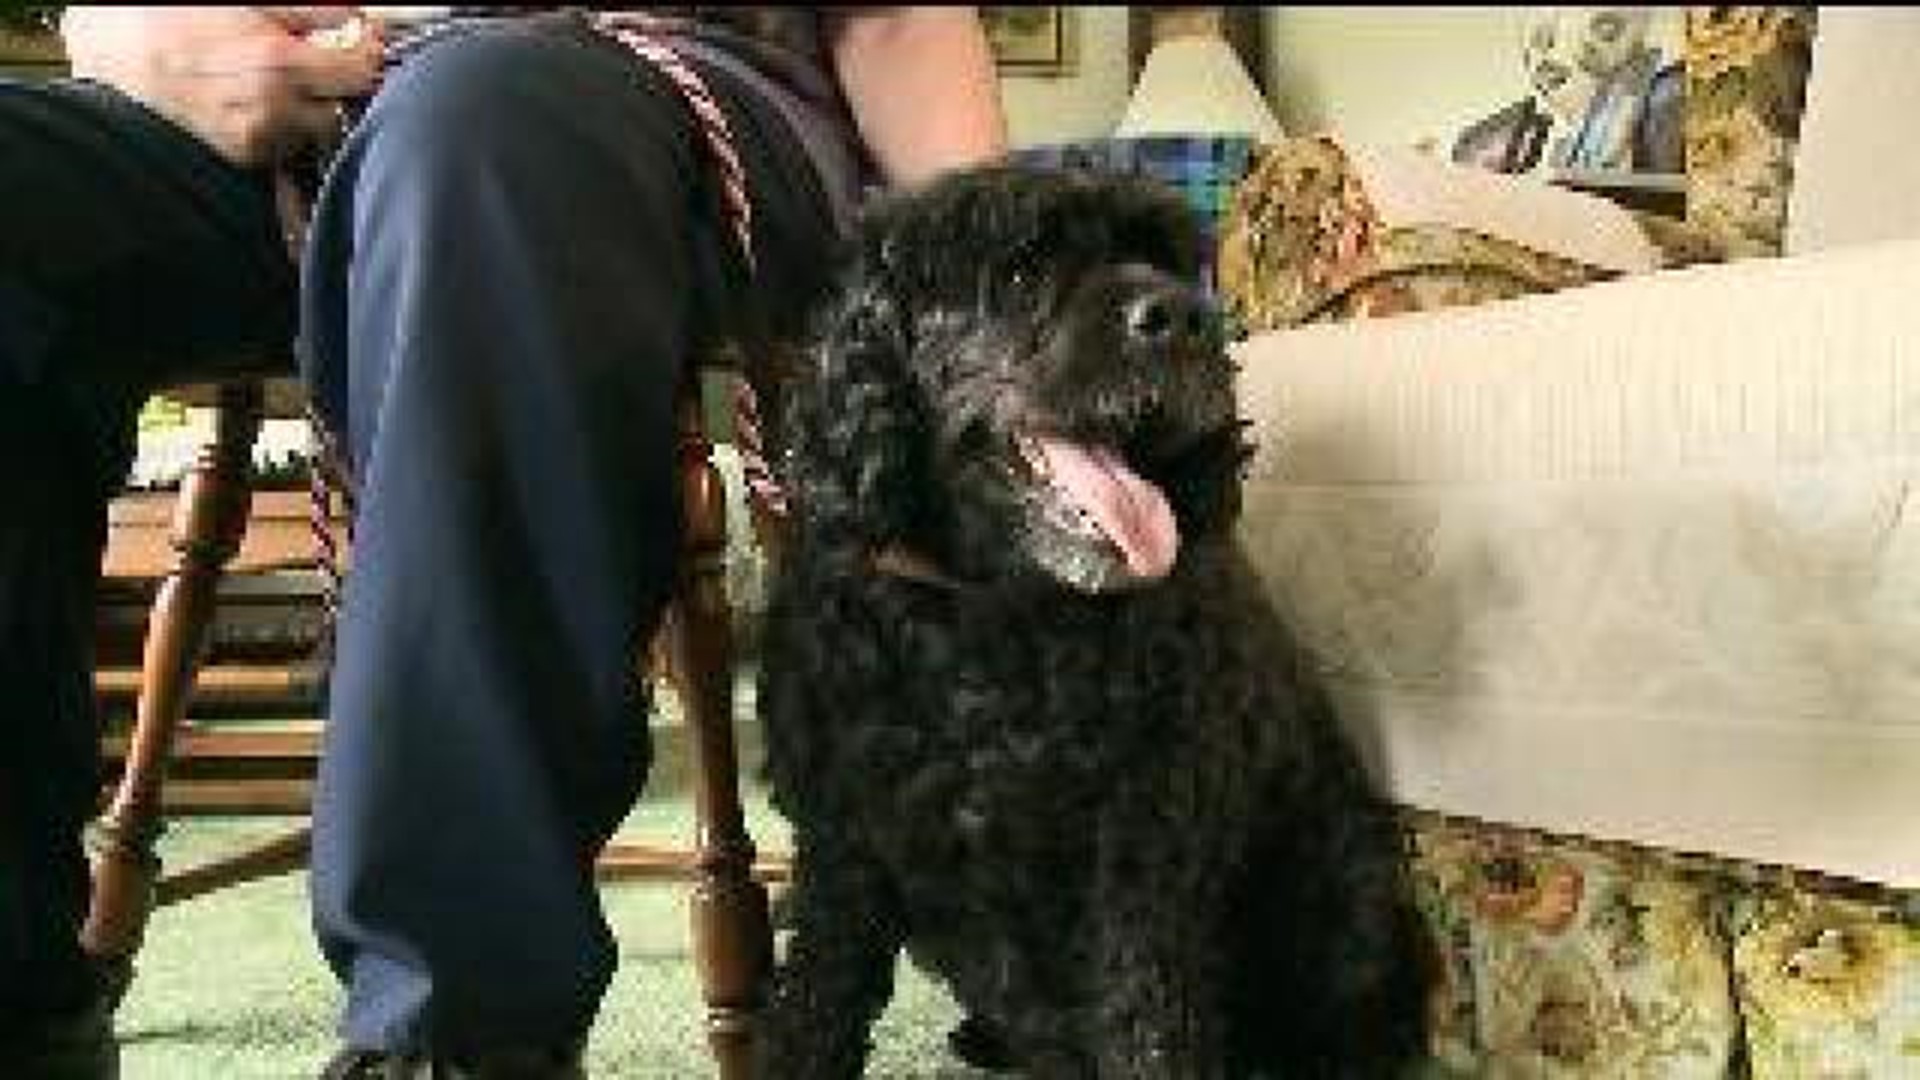 Happy Ending: Susie The Dog Returned Home Safely